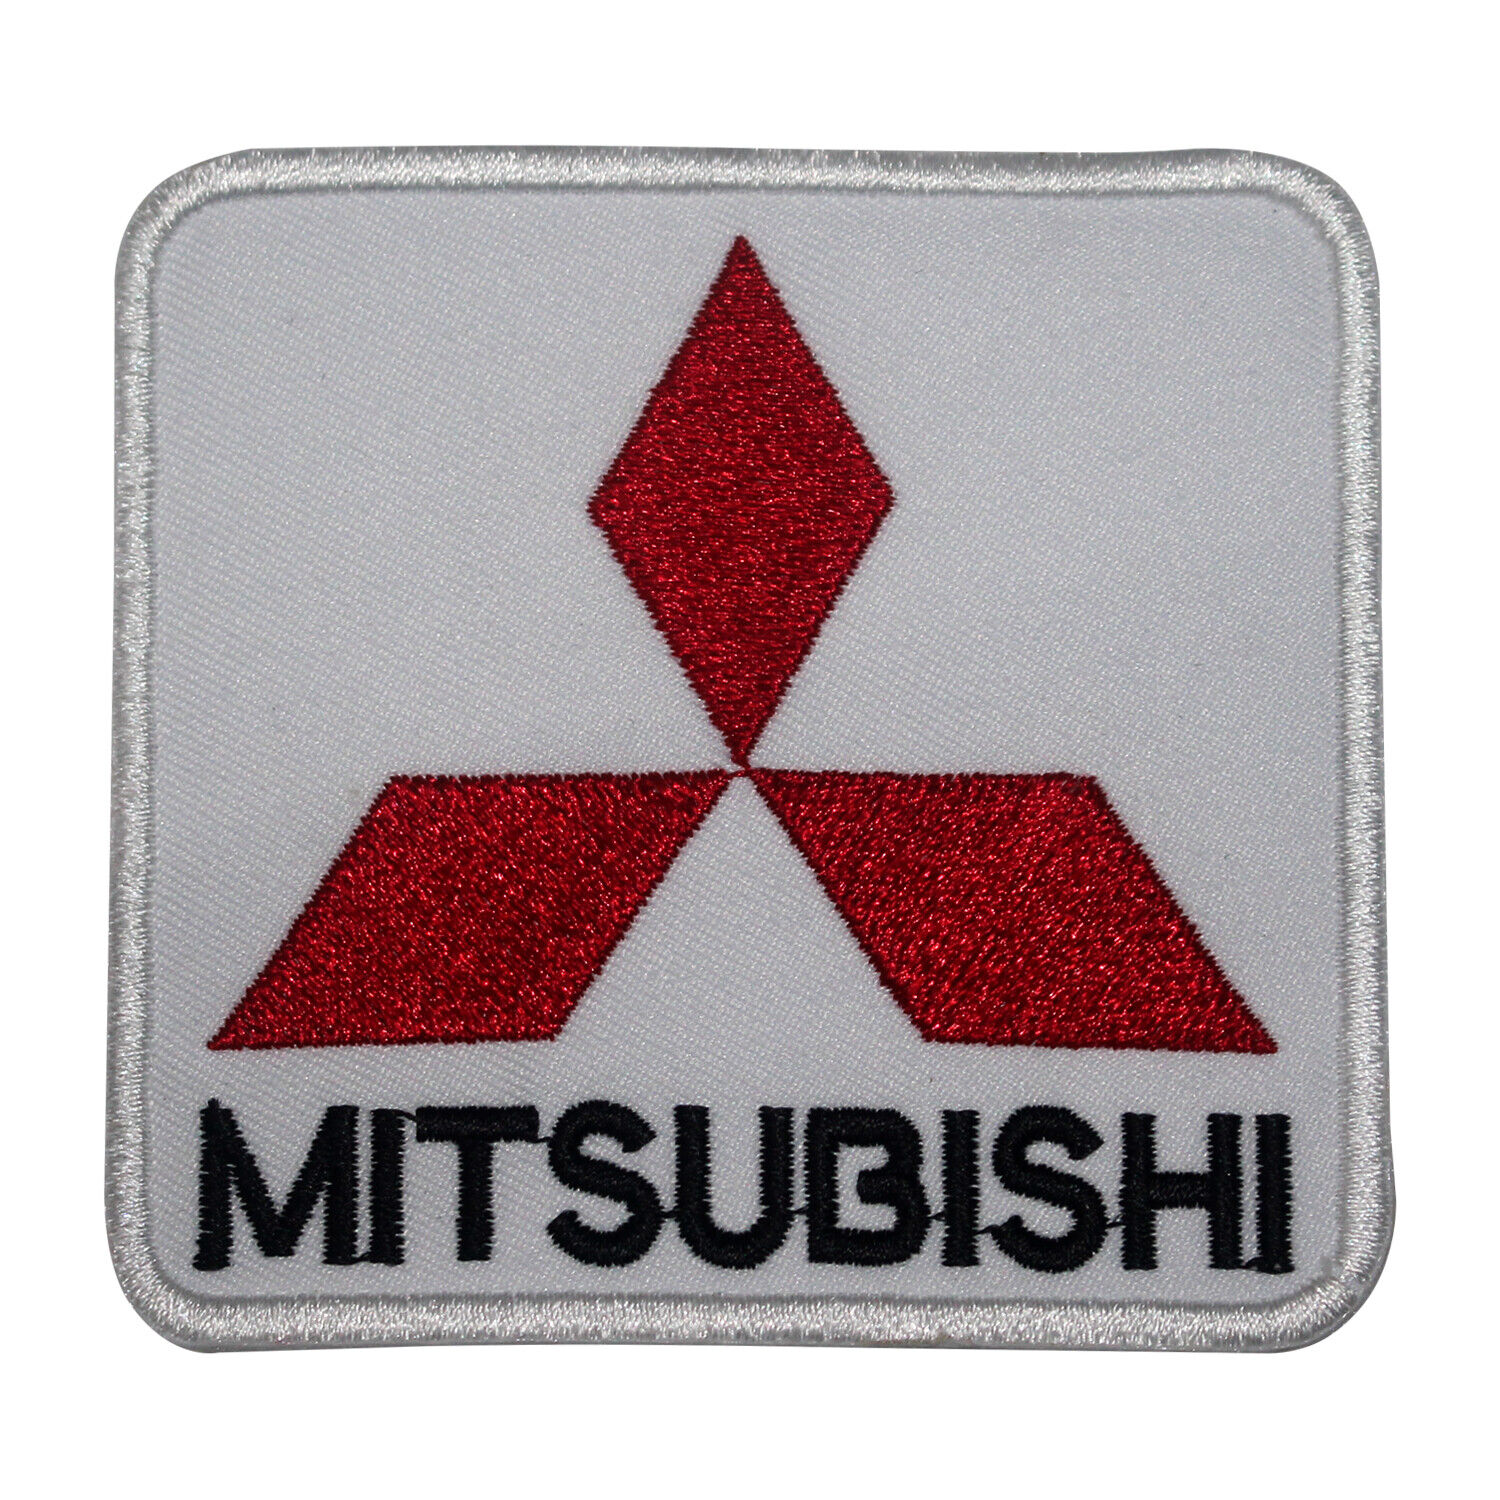 Mitsubishi Logo Patch Iron On Patch Sew On Badge Patch Embroidery Patch 